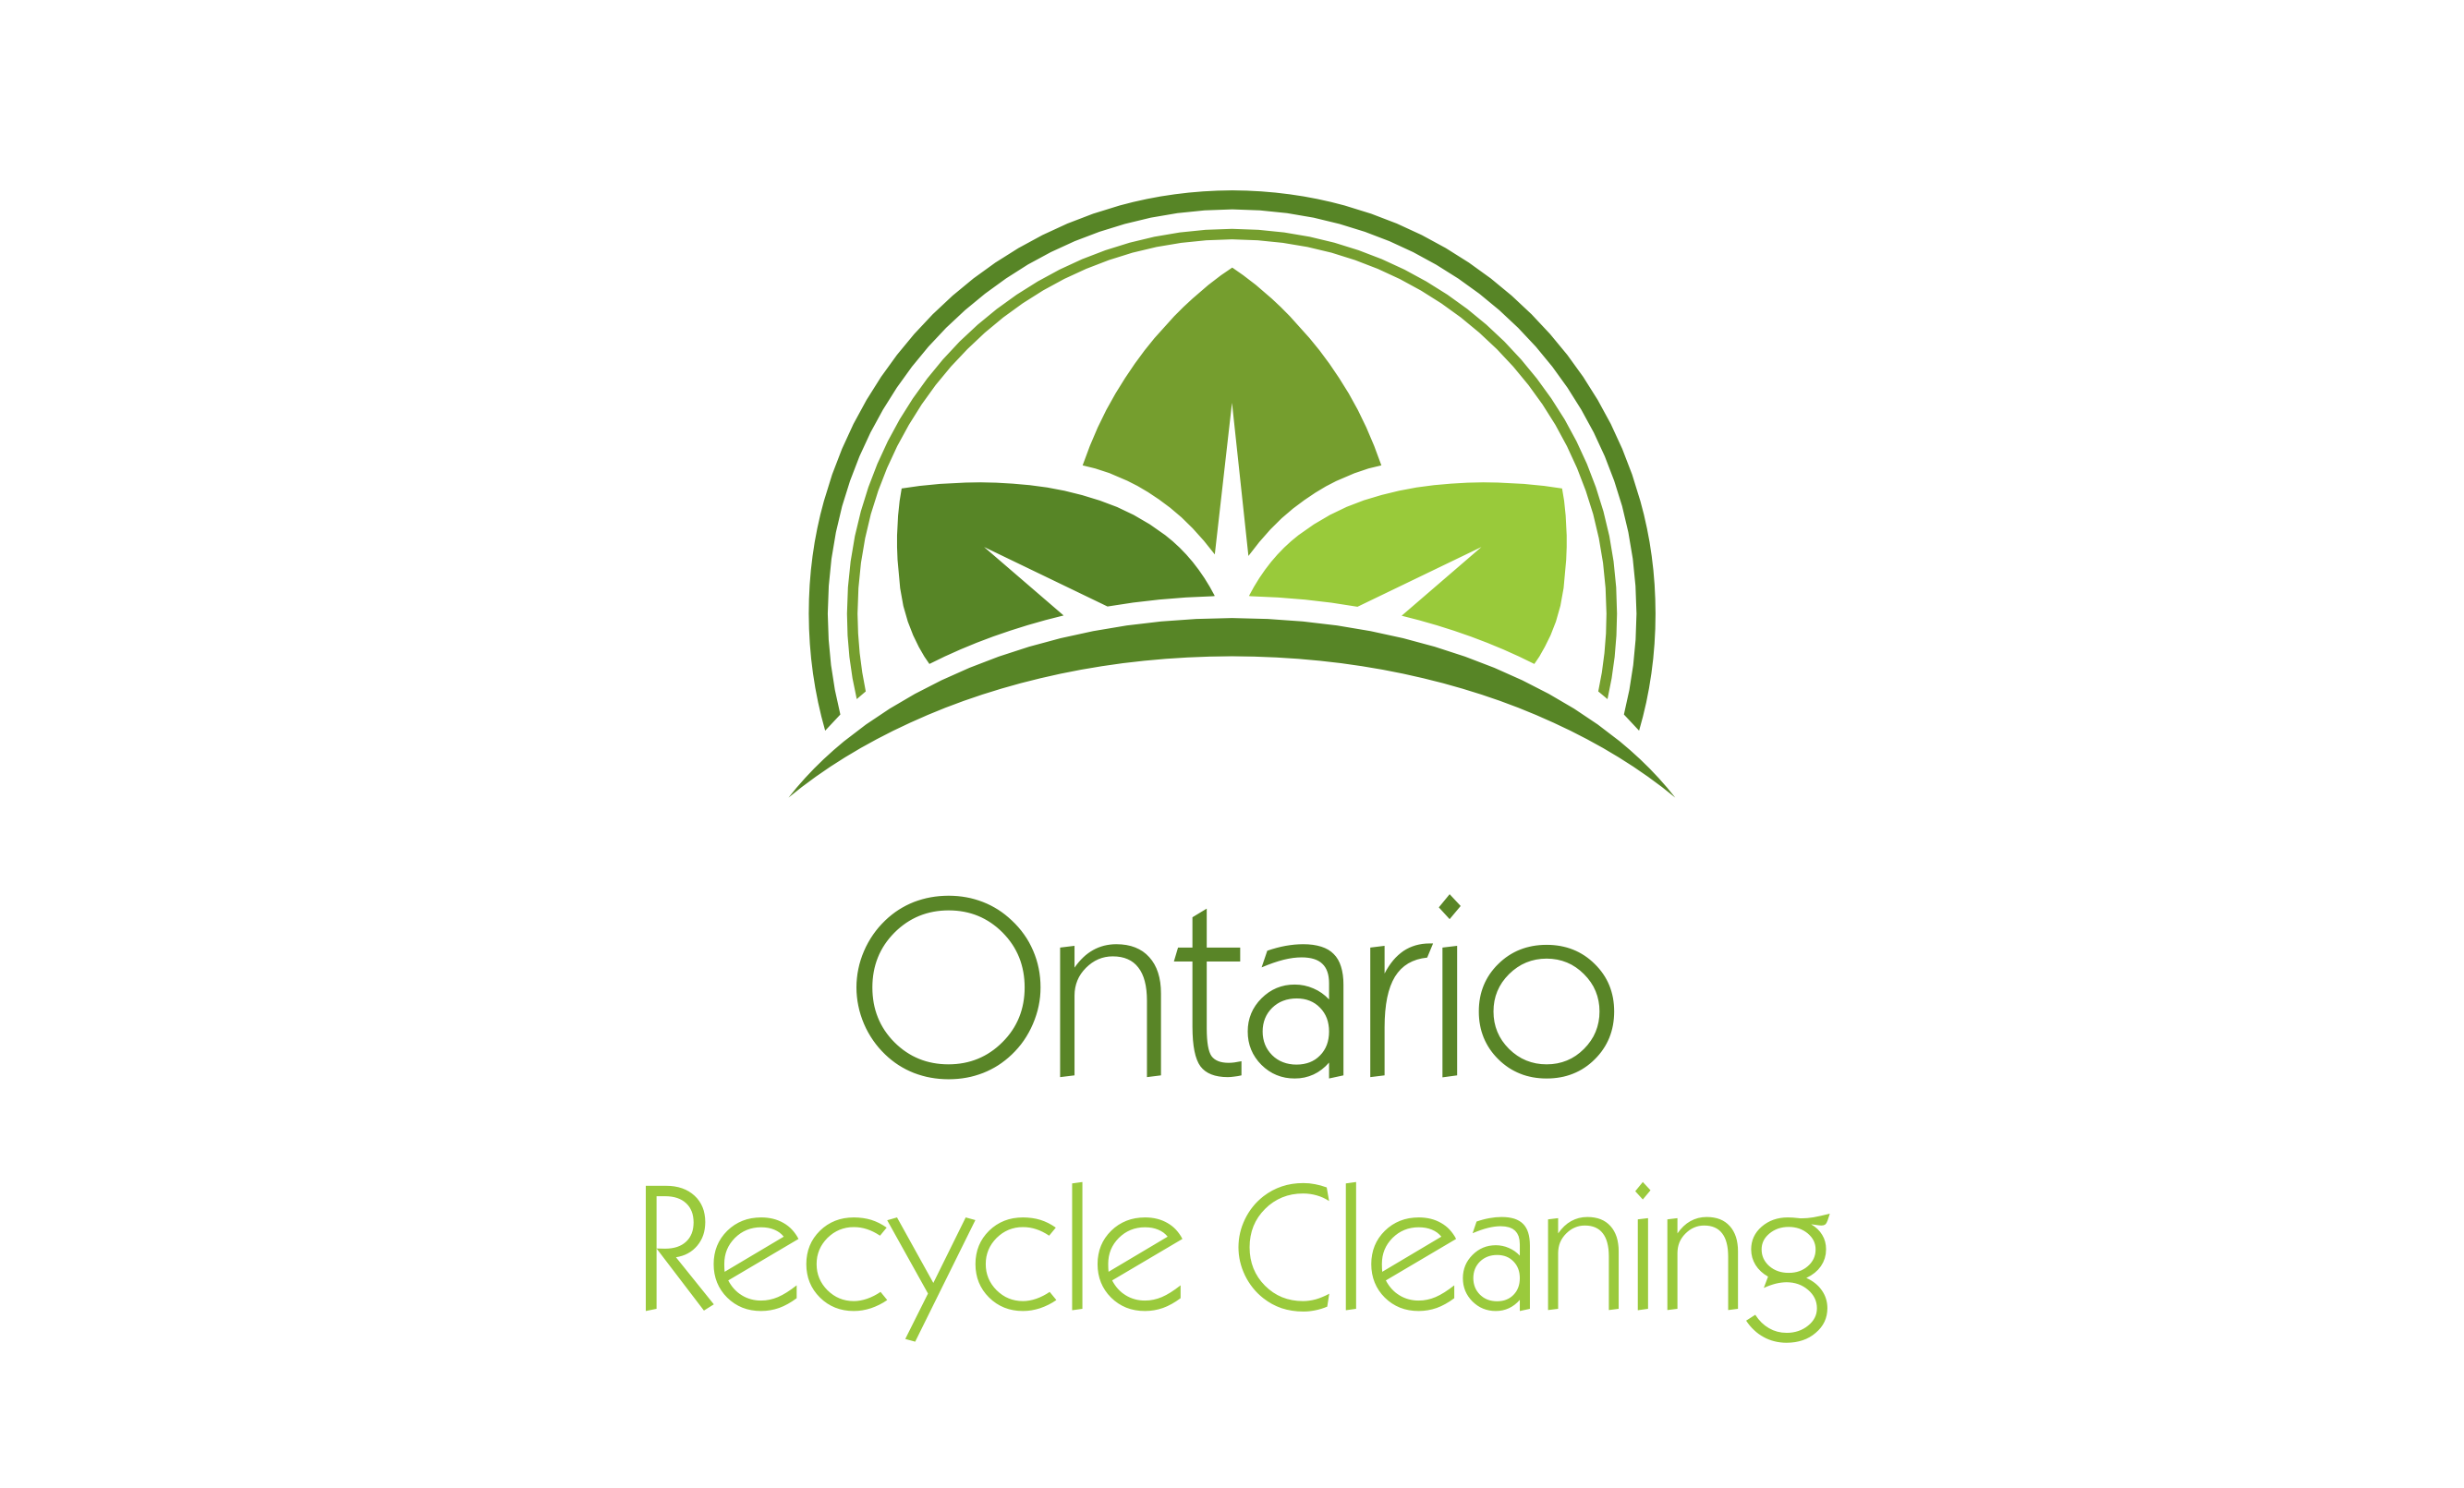 Ontario Recycle Cleaning